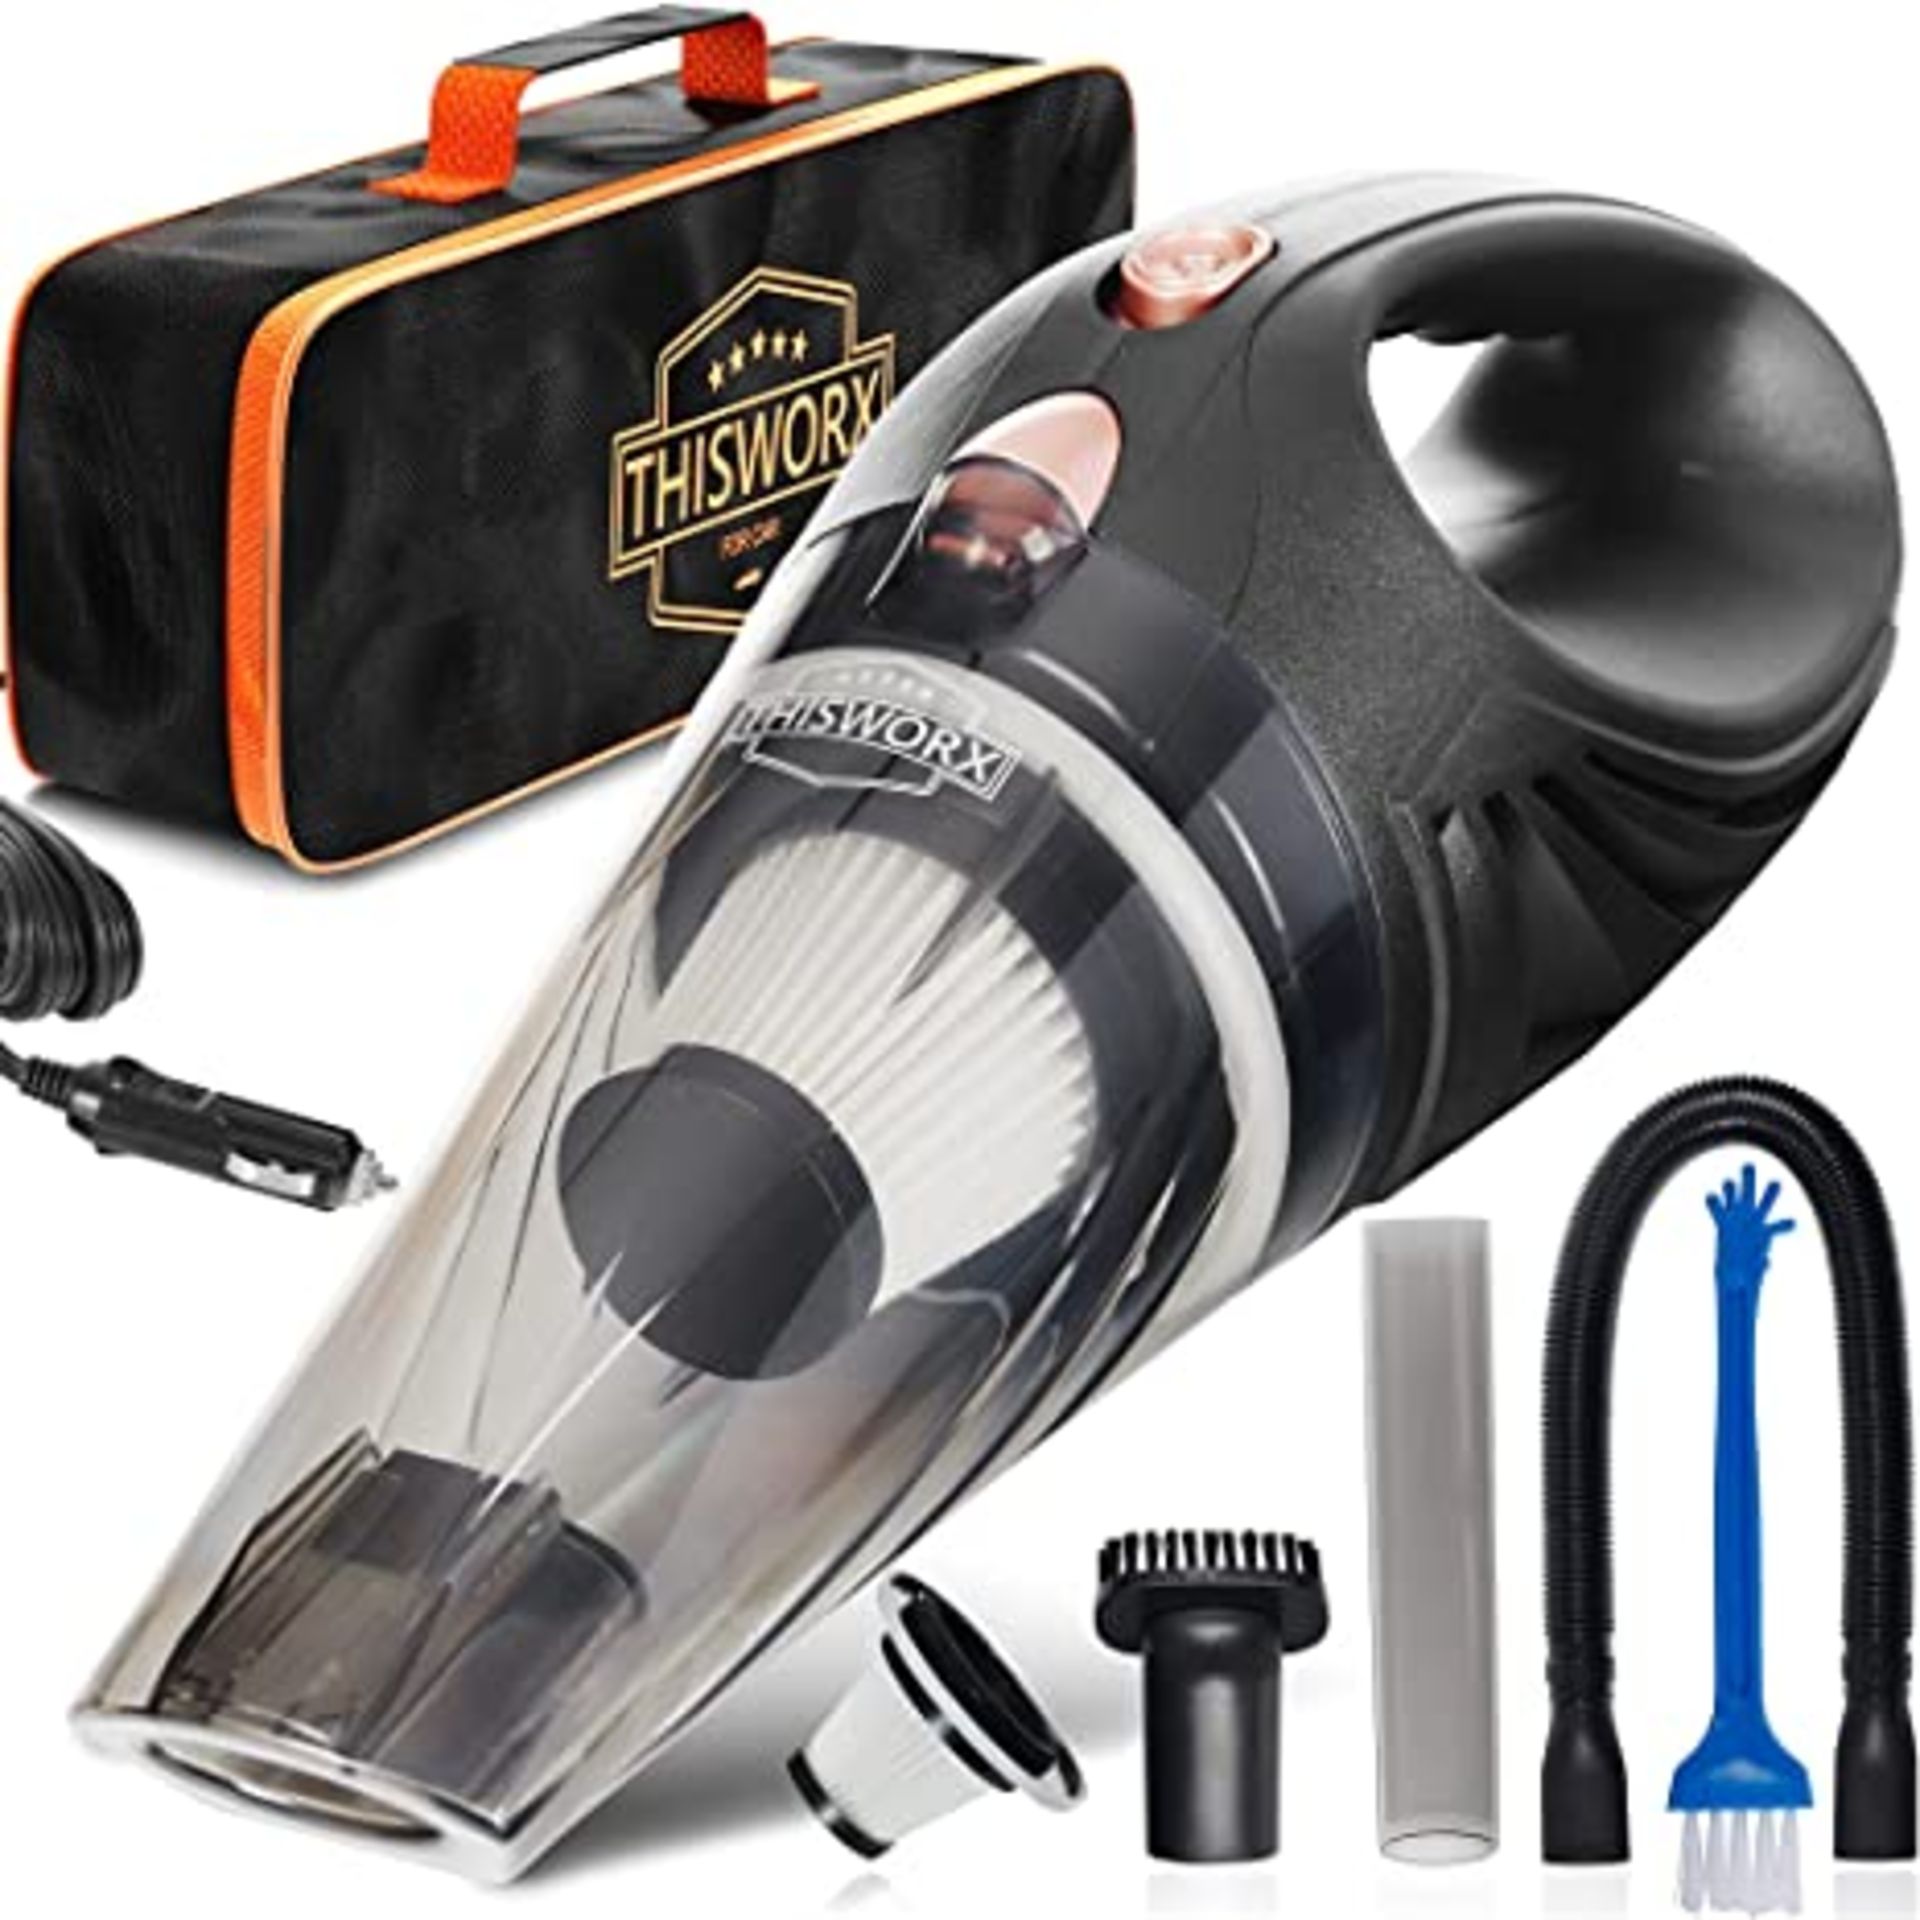 RRP - £22.19 ThisWorx Car Vacuum Cleaner - Portable, Lightweight, Powerful, Handheld Vacuums w/Stron - Image 2 of 2